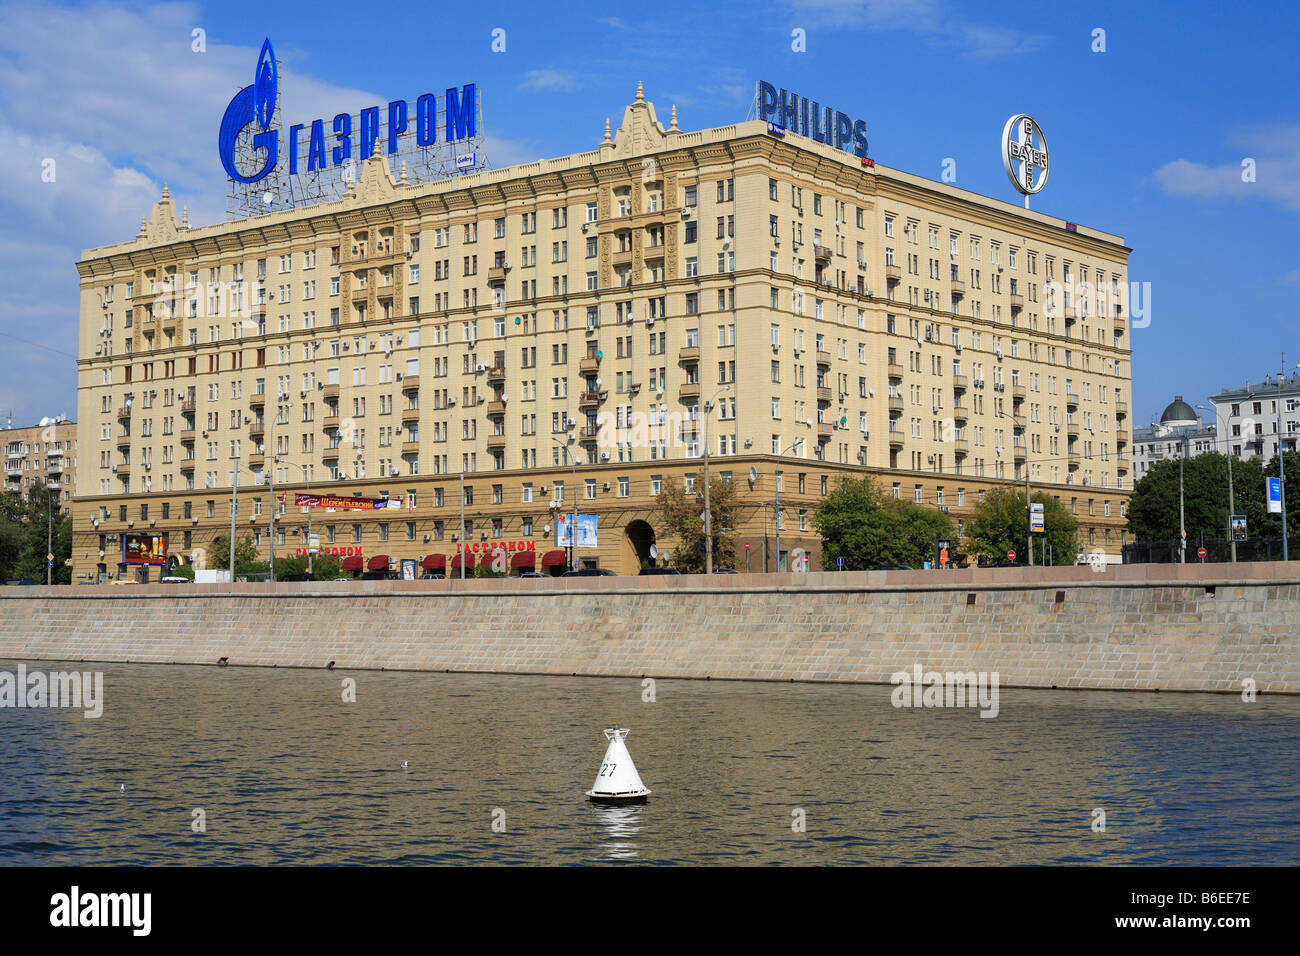 House with advertisement of 'Gasprom', view from Moskva river, Moscow, Russia Stock Photo